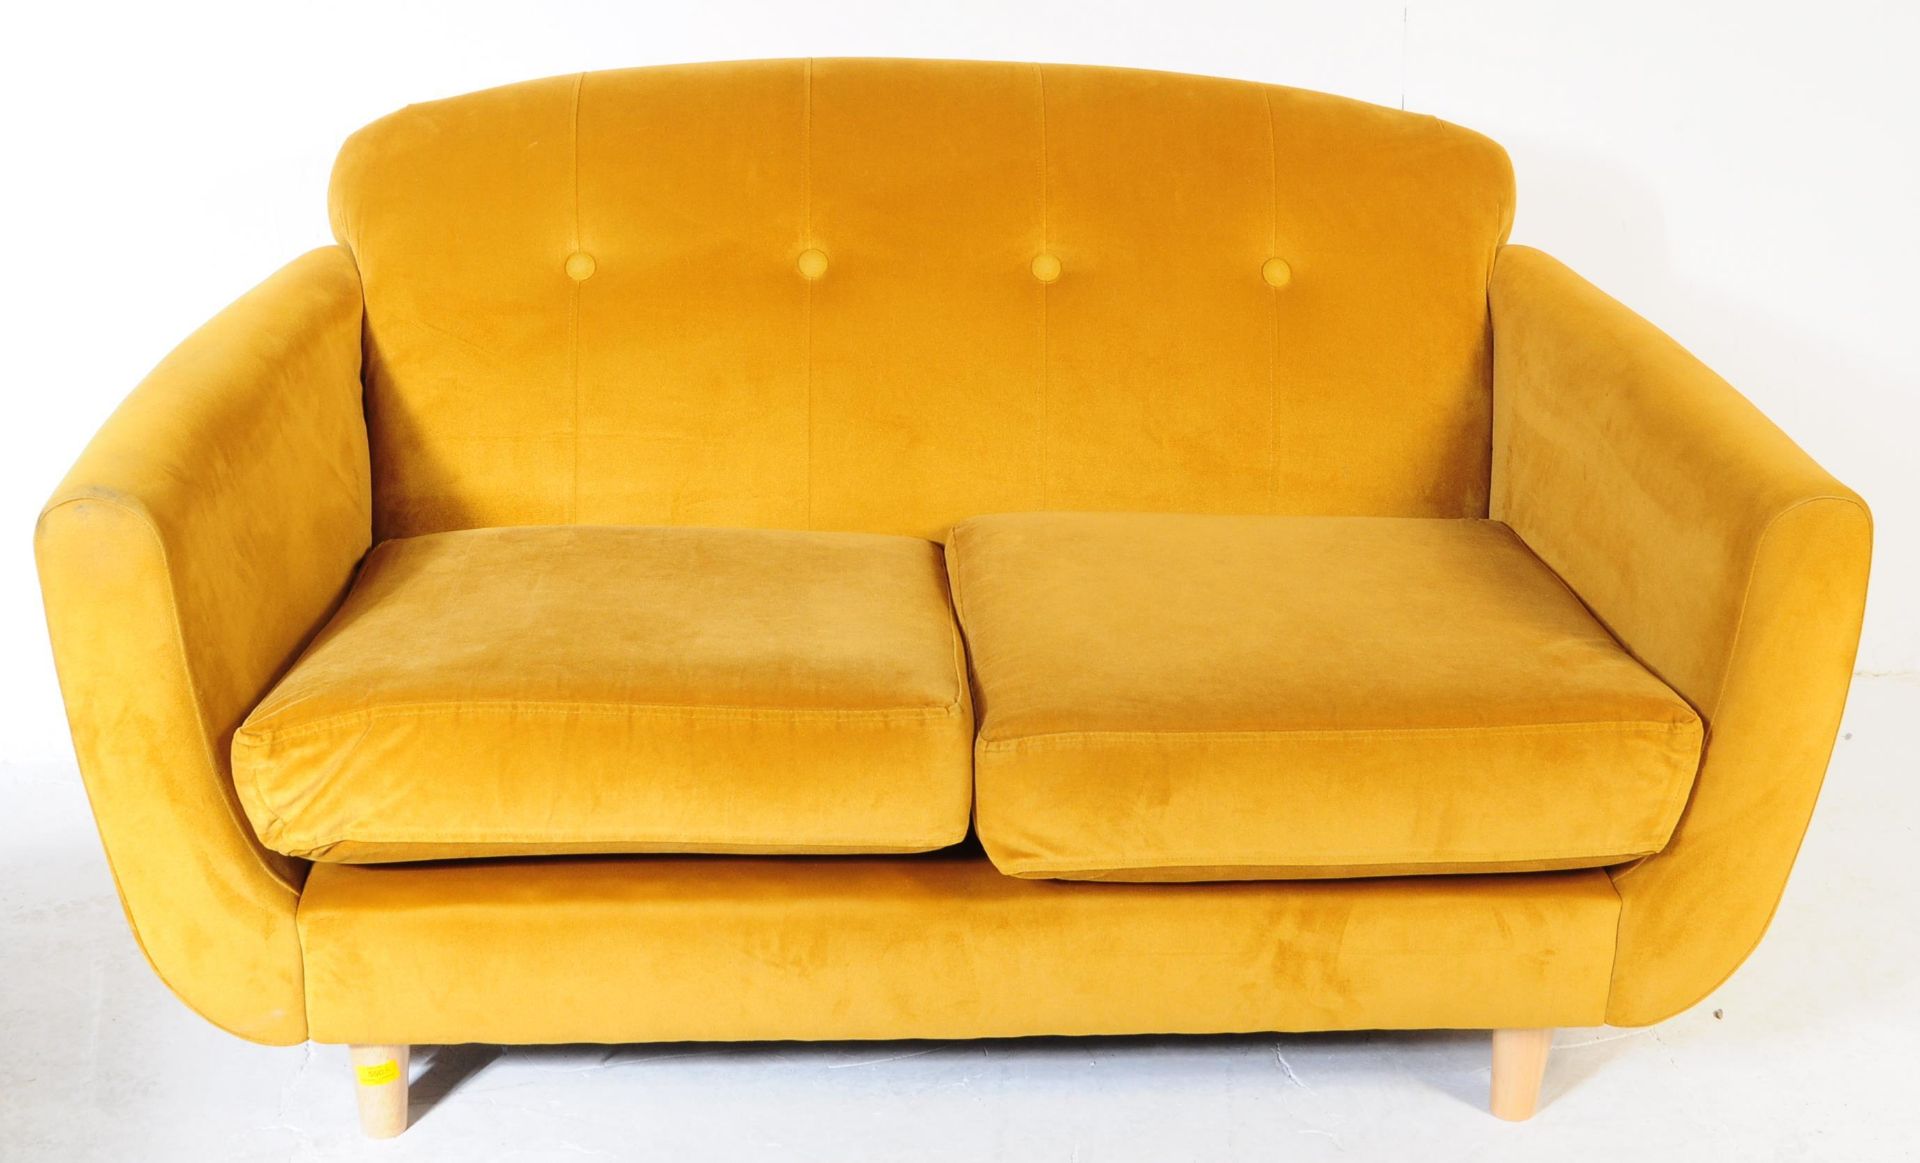 CONTEMPORARY MUSTARD YELLOW TWO SEATER SOFA - Image 3 of 6